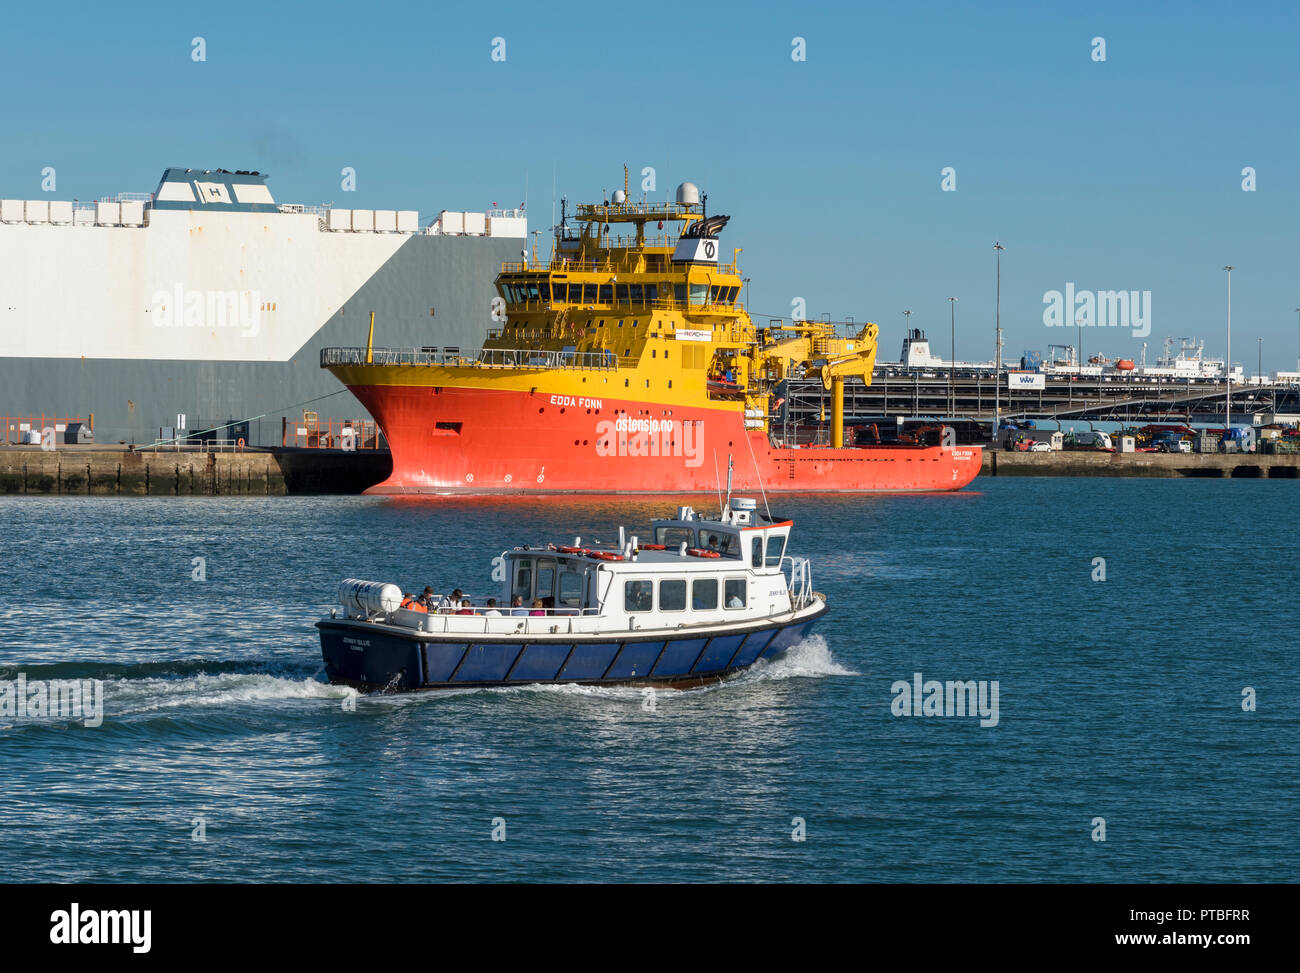 ostensjo rederi as tug edda fonn alongside in the port of Southampton docks, uk with the hythe ferry in the foreground. Stock Photo